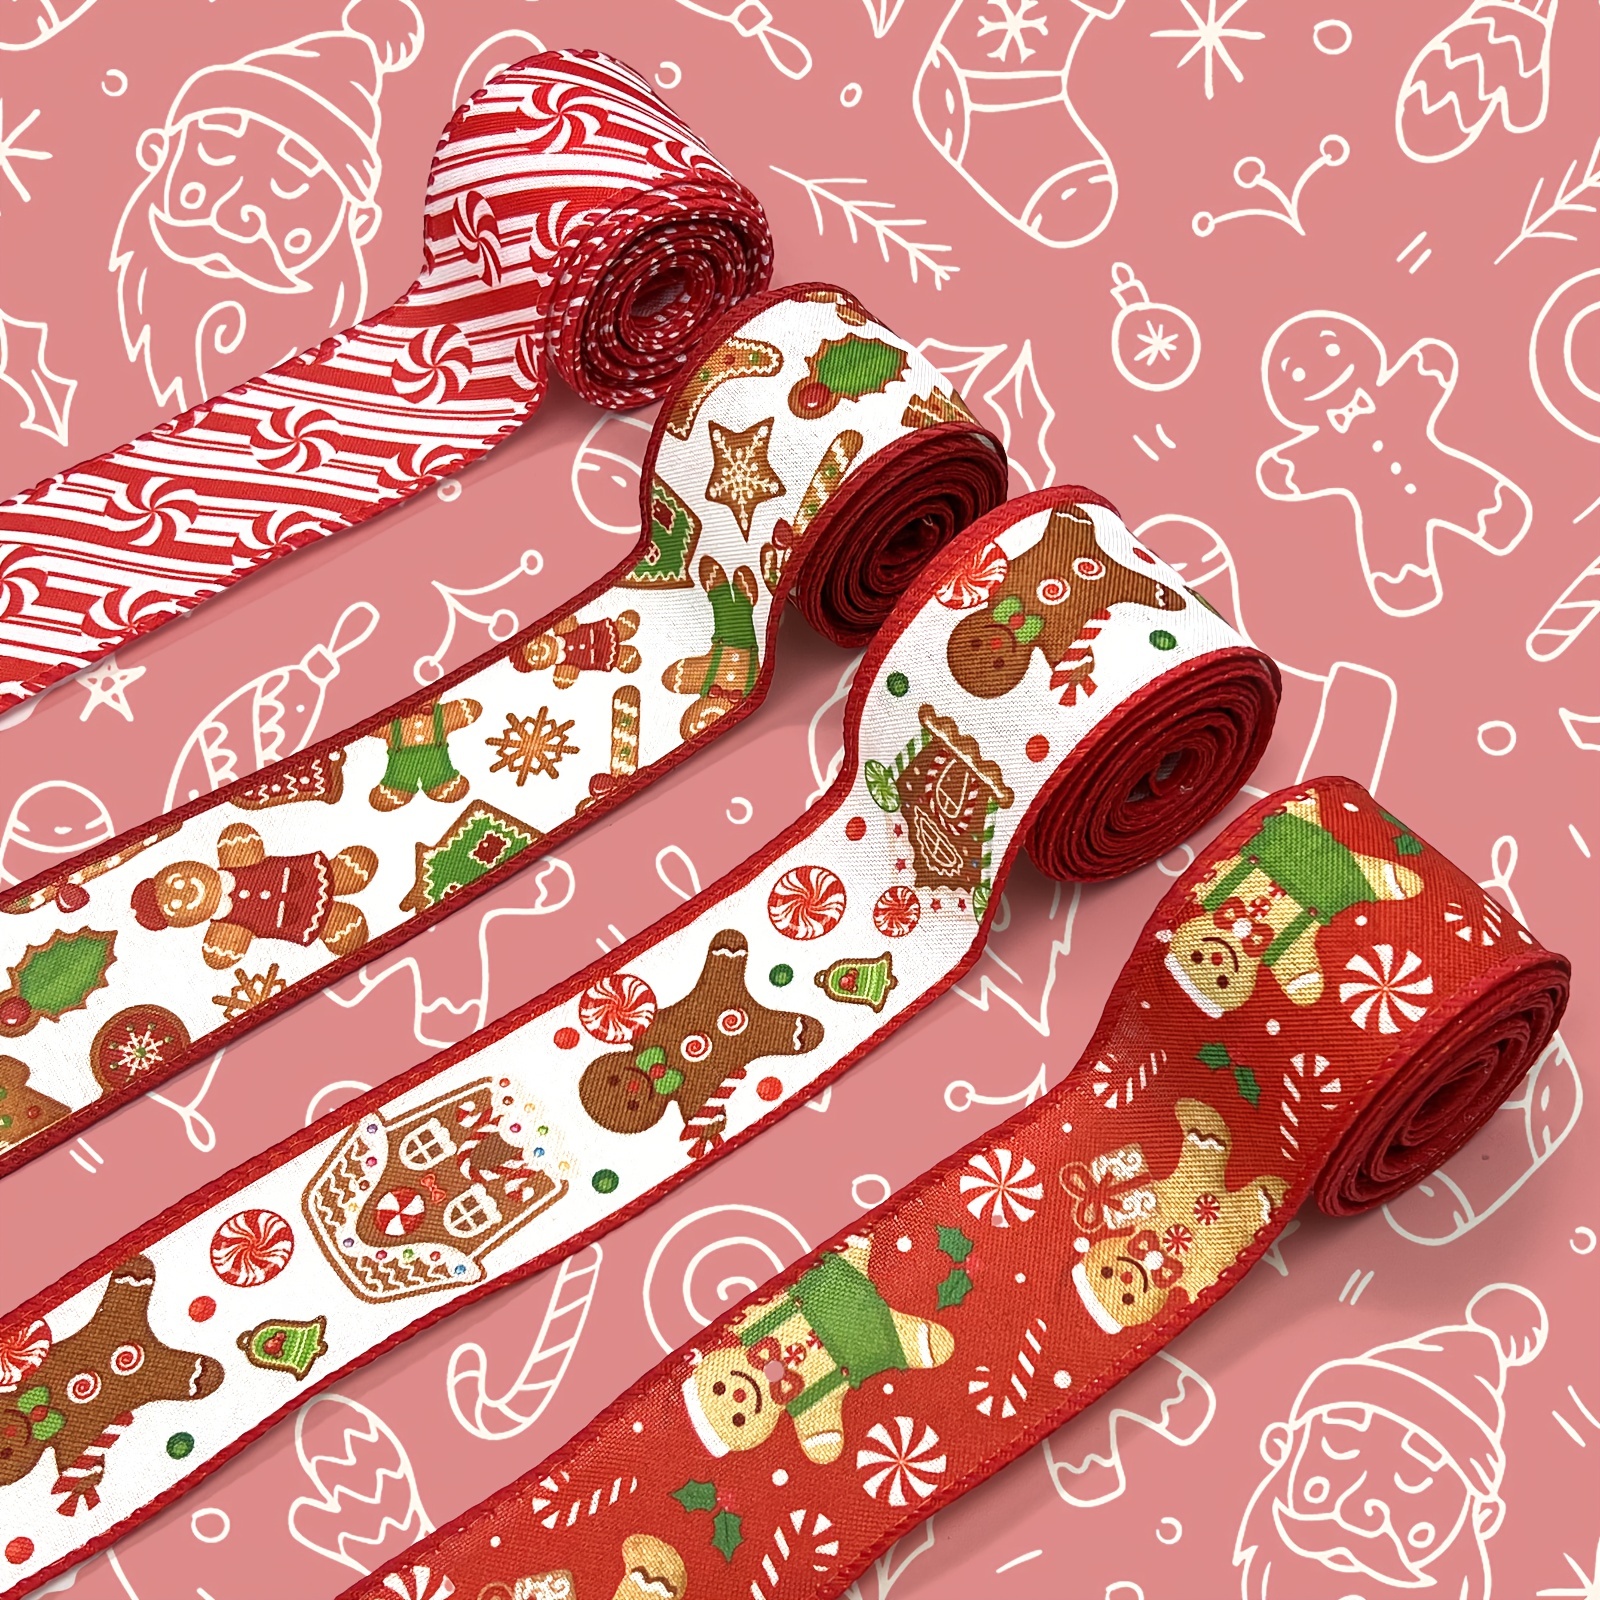 Christmas Ribbon Set, Holiday Grosgrain Ribbons for Gift Package Wrapping -  pattern:D 